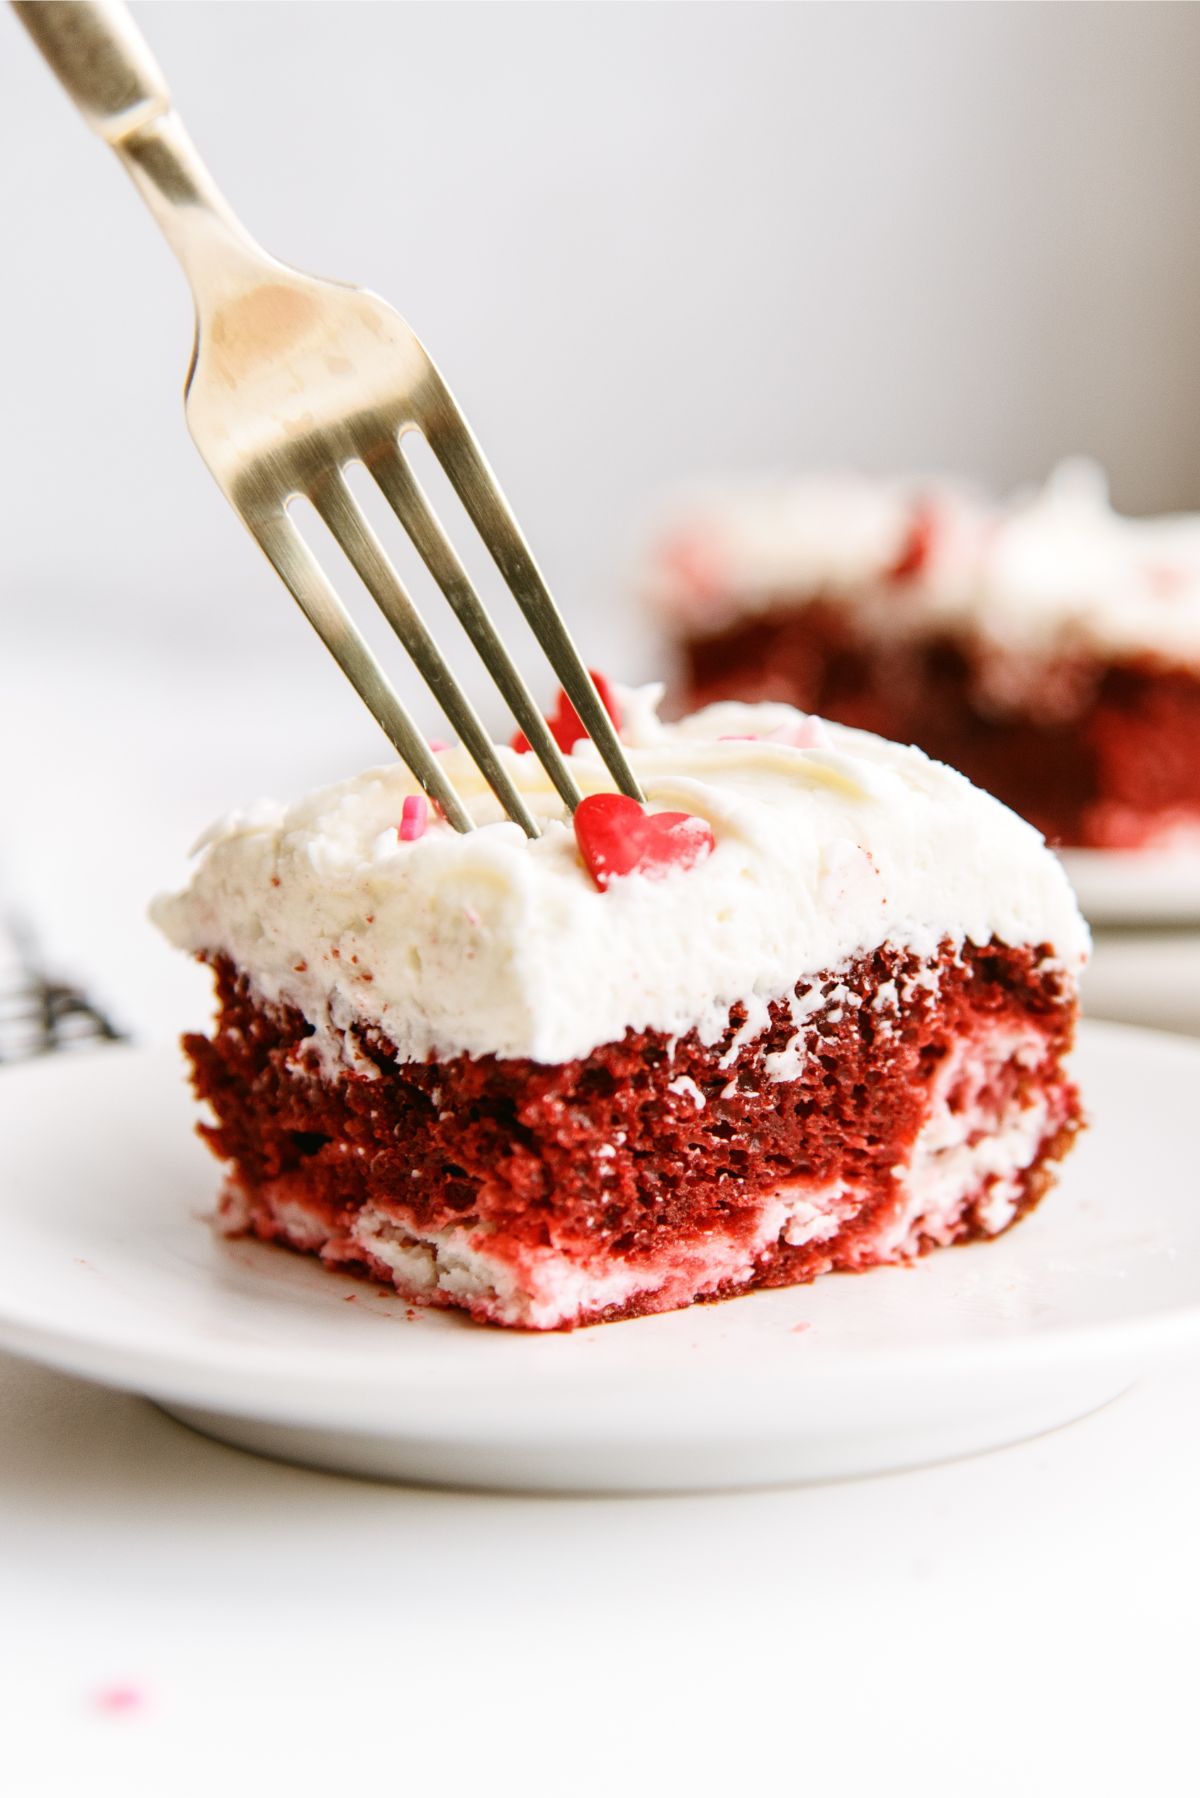 A slice of Red Velvet Cheesecake Swirl Cake on a plate with a fork ready to take a bite